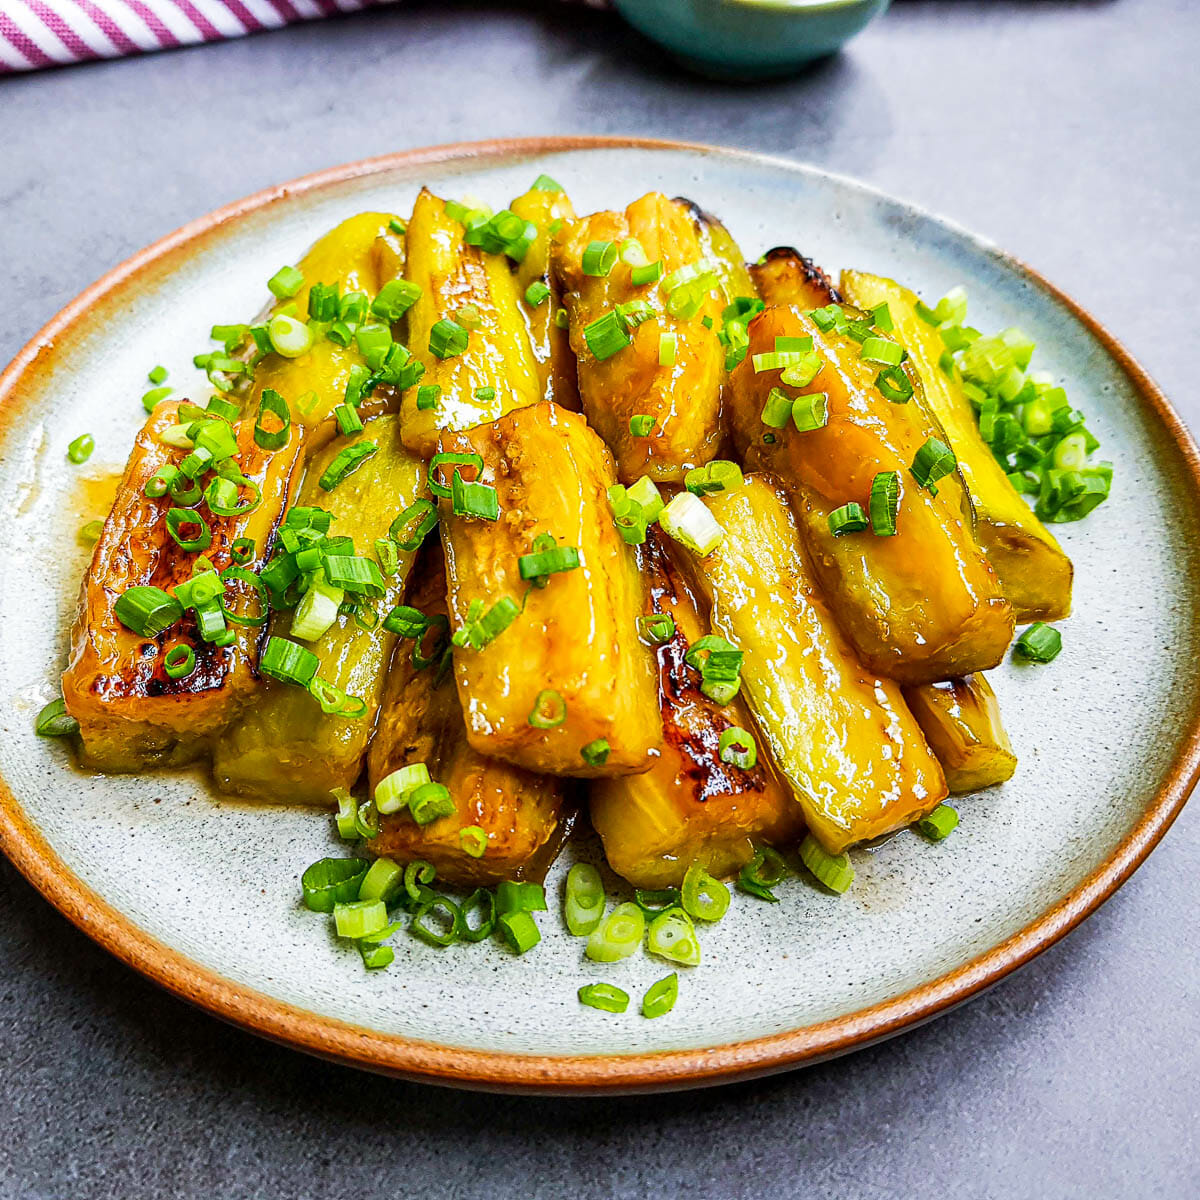 a plate of stir-fried eggplants with sweet miso sauce and garnished with green onion